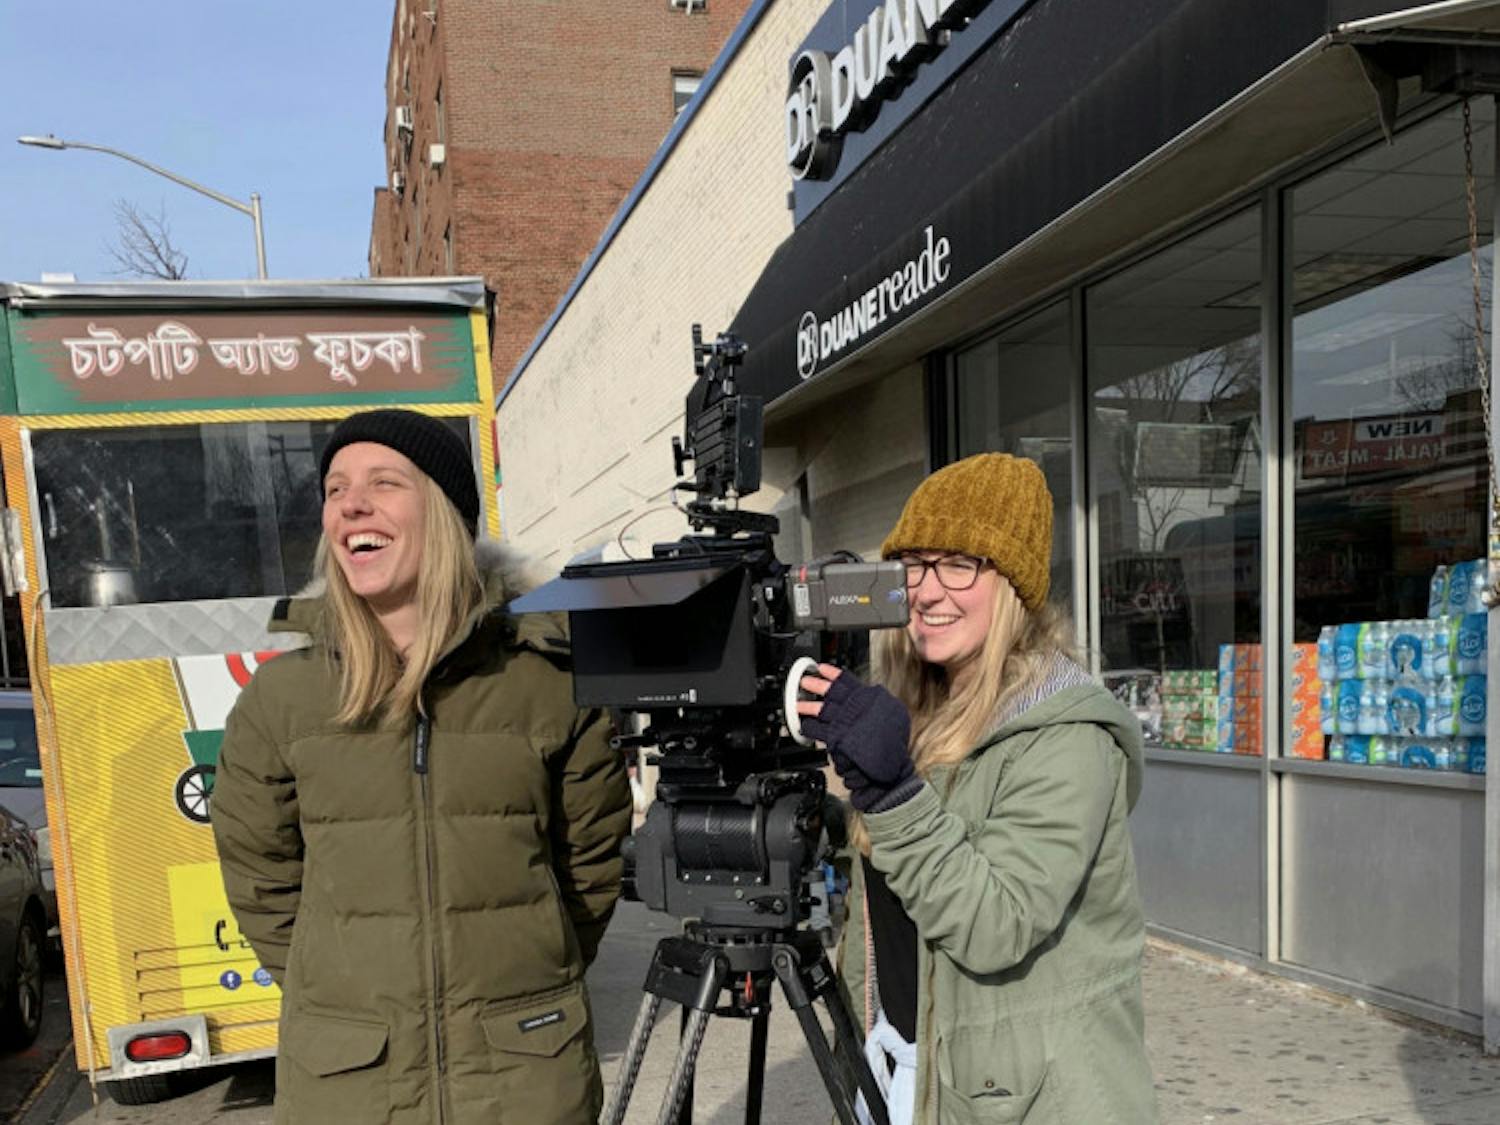 Chloe Weaver (left) and Amanda Deery (right) on the set of “American.ish”. The livestream with Weaver marks the first in the College of Journalism and Communication’s new series, “Great Storytellers: Women and the Art of Film."